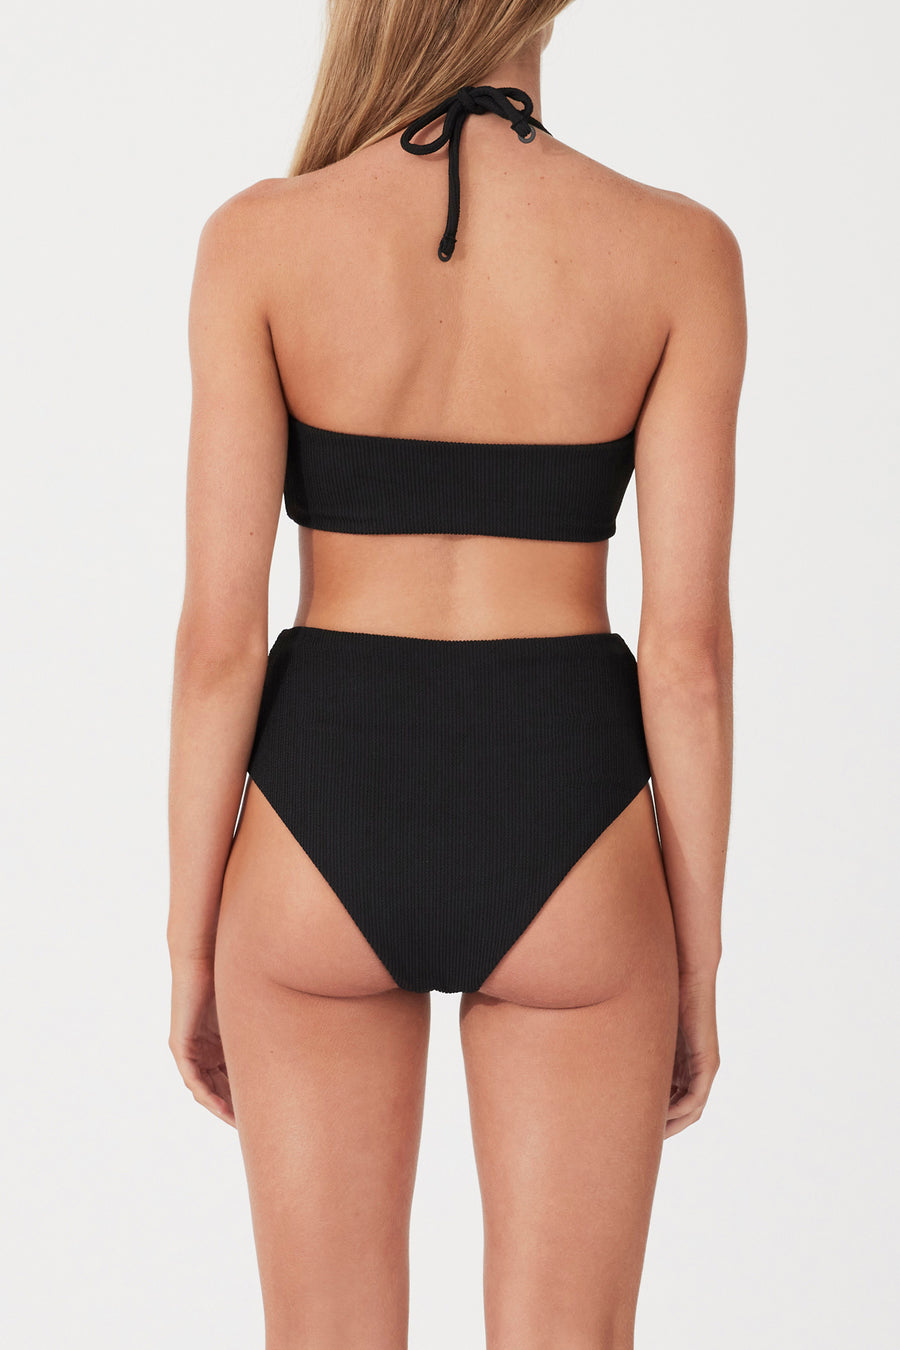 Zulu and Zephyr Black Textured Waisted Full Brief